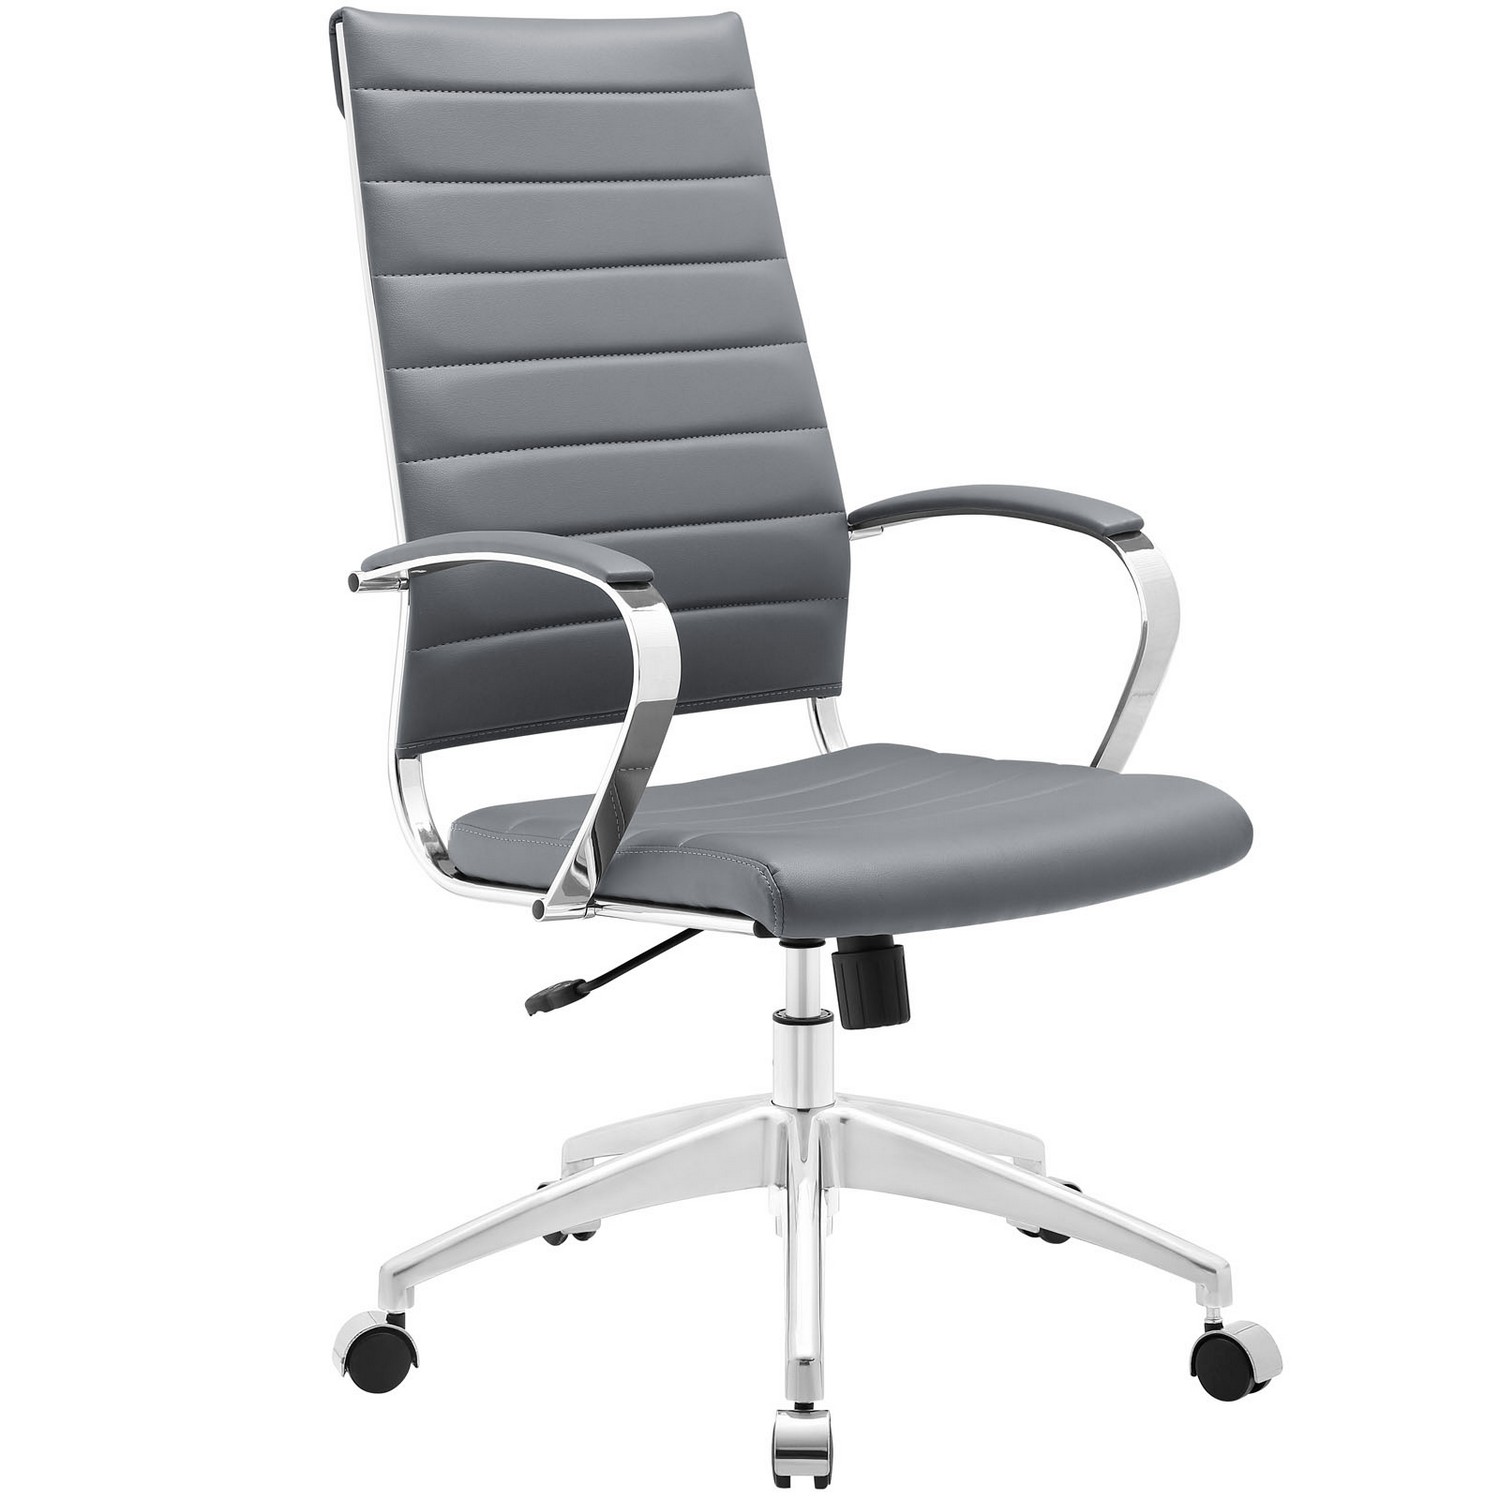 Modway Jive Highback Office Chair - Gray